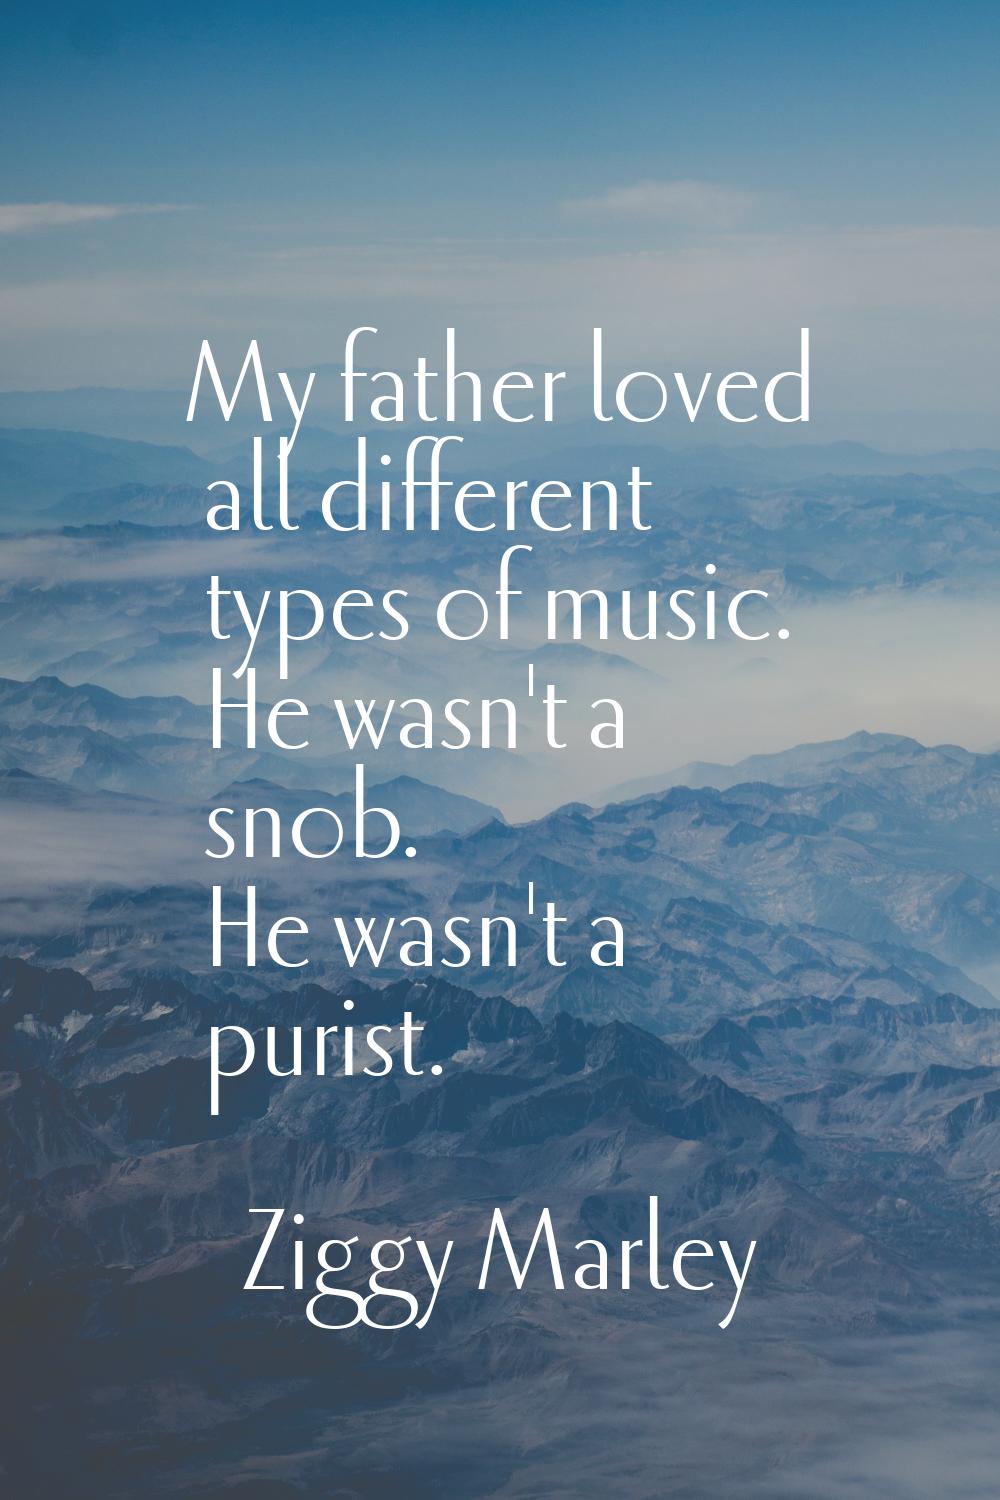 My father loved all different types of music. He wasn't a snob. He wasn't a purist.